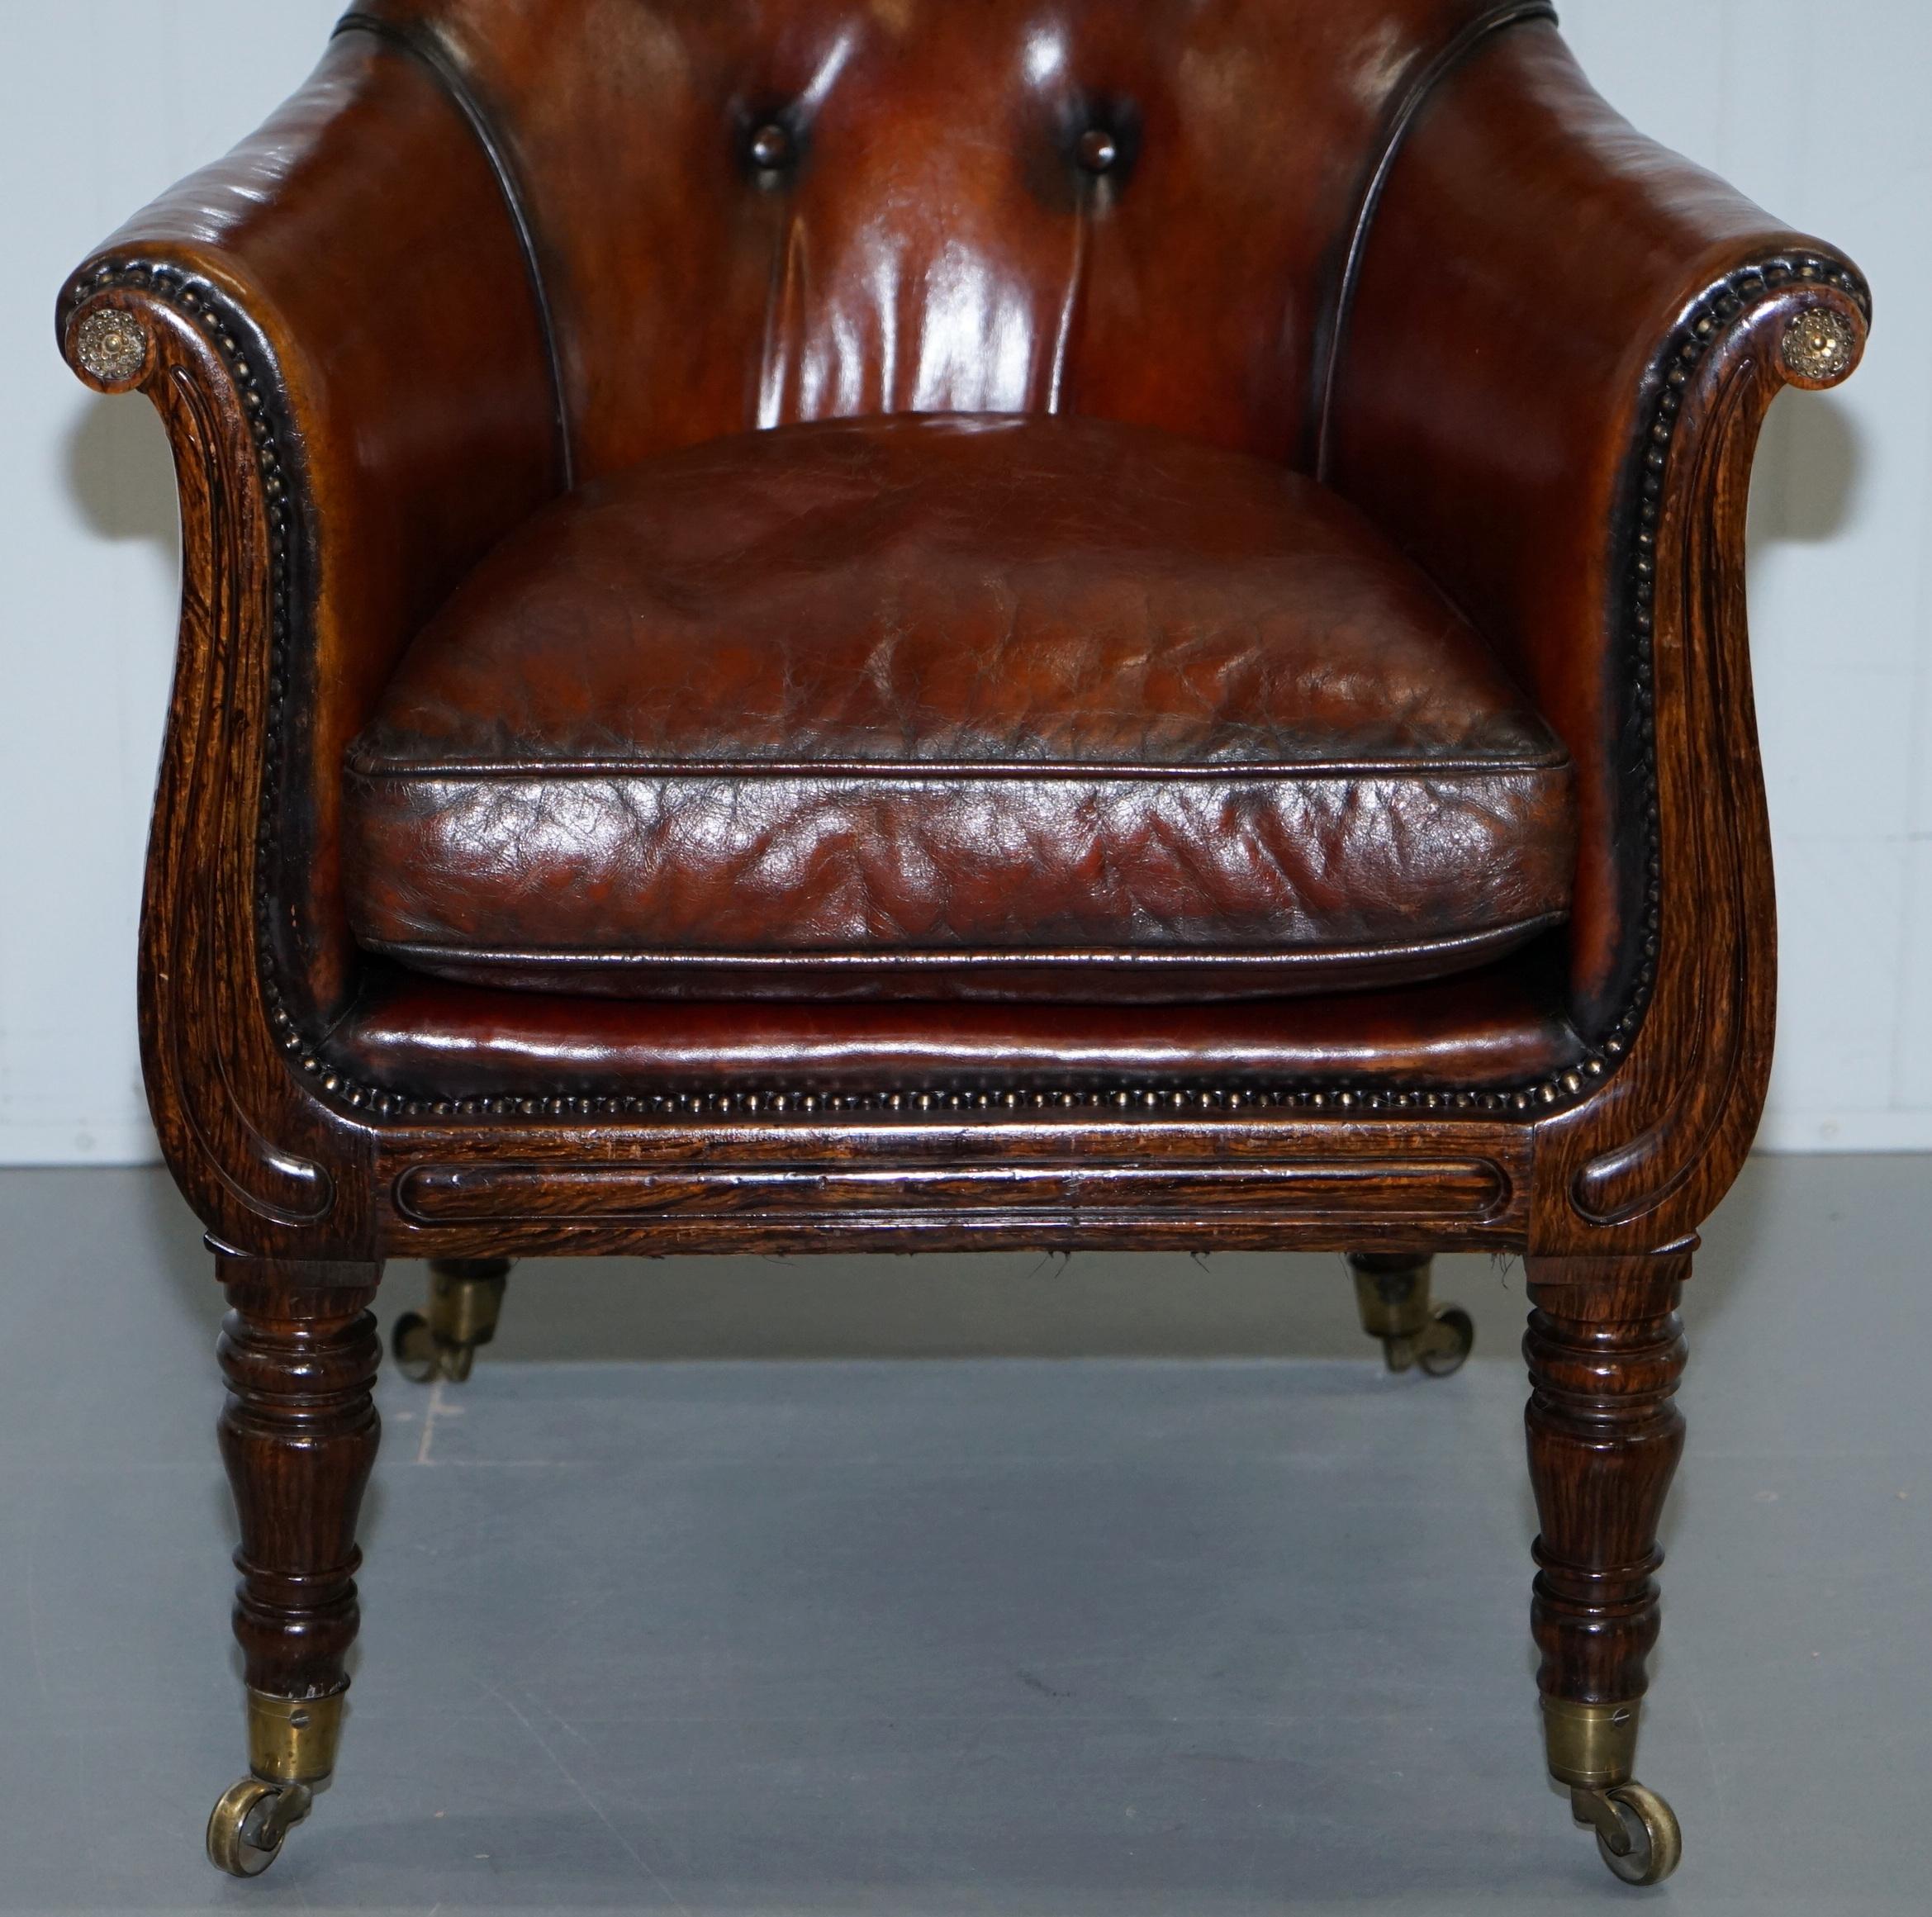 Rare Attributed to Gillows Regency Armchair Hand Dyed Brown Leather Hand-Painted For Sale 3